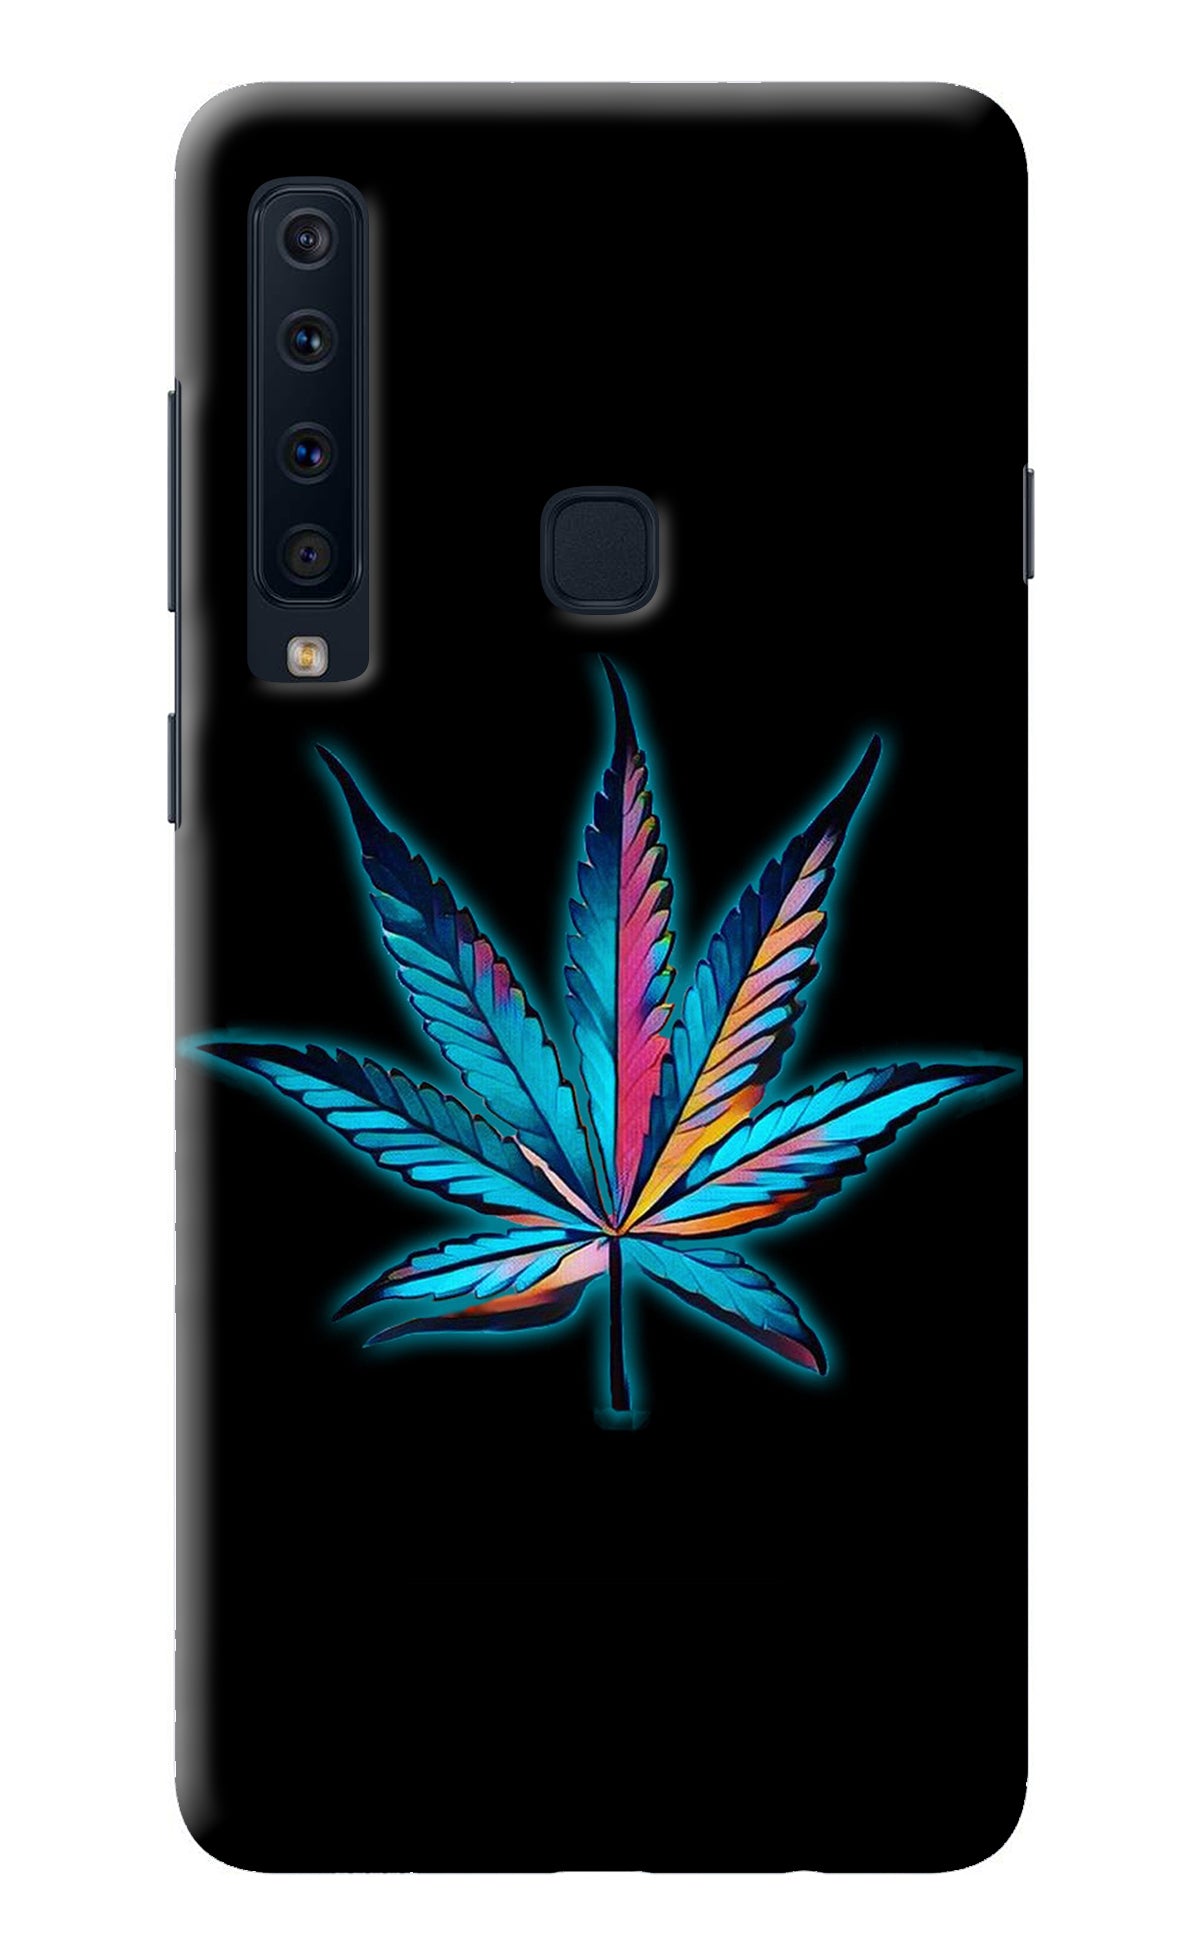 Weed Samsung A9 Back Cover